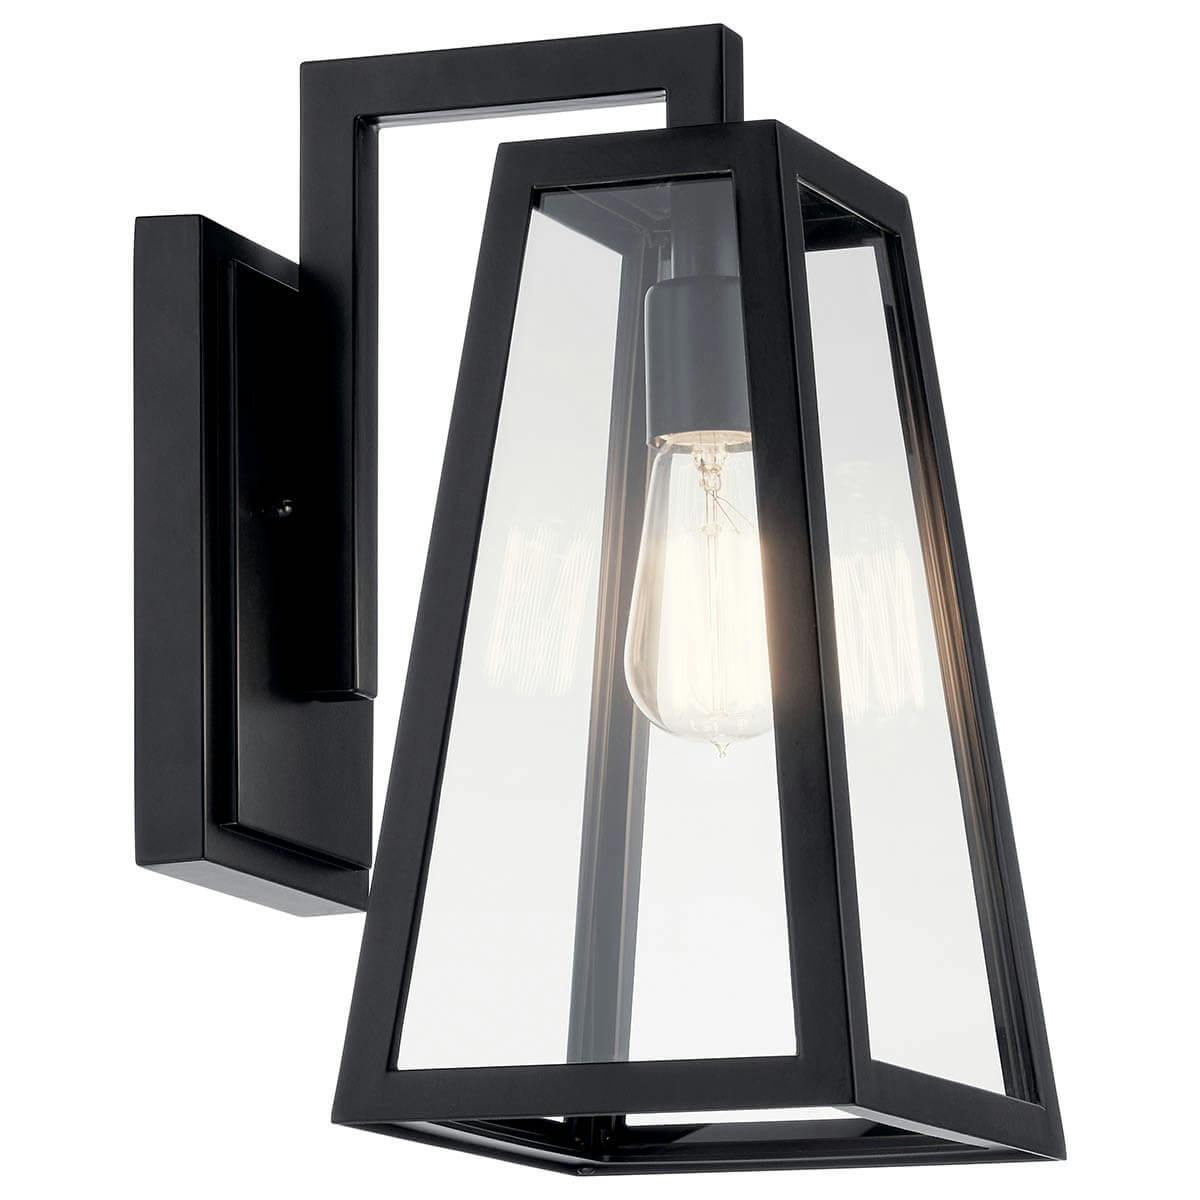 The Delison 14" 1 Light Wall Light Black on a white background